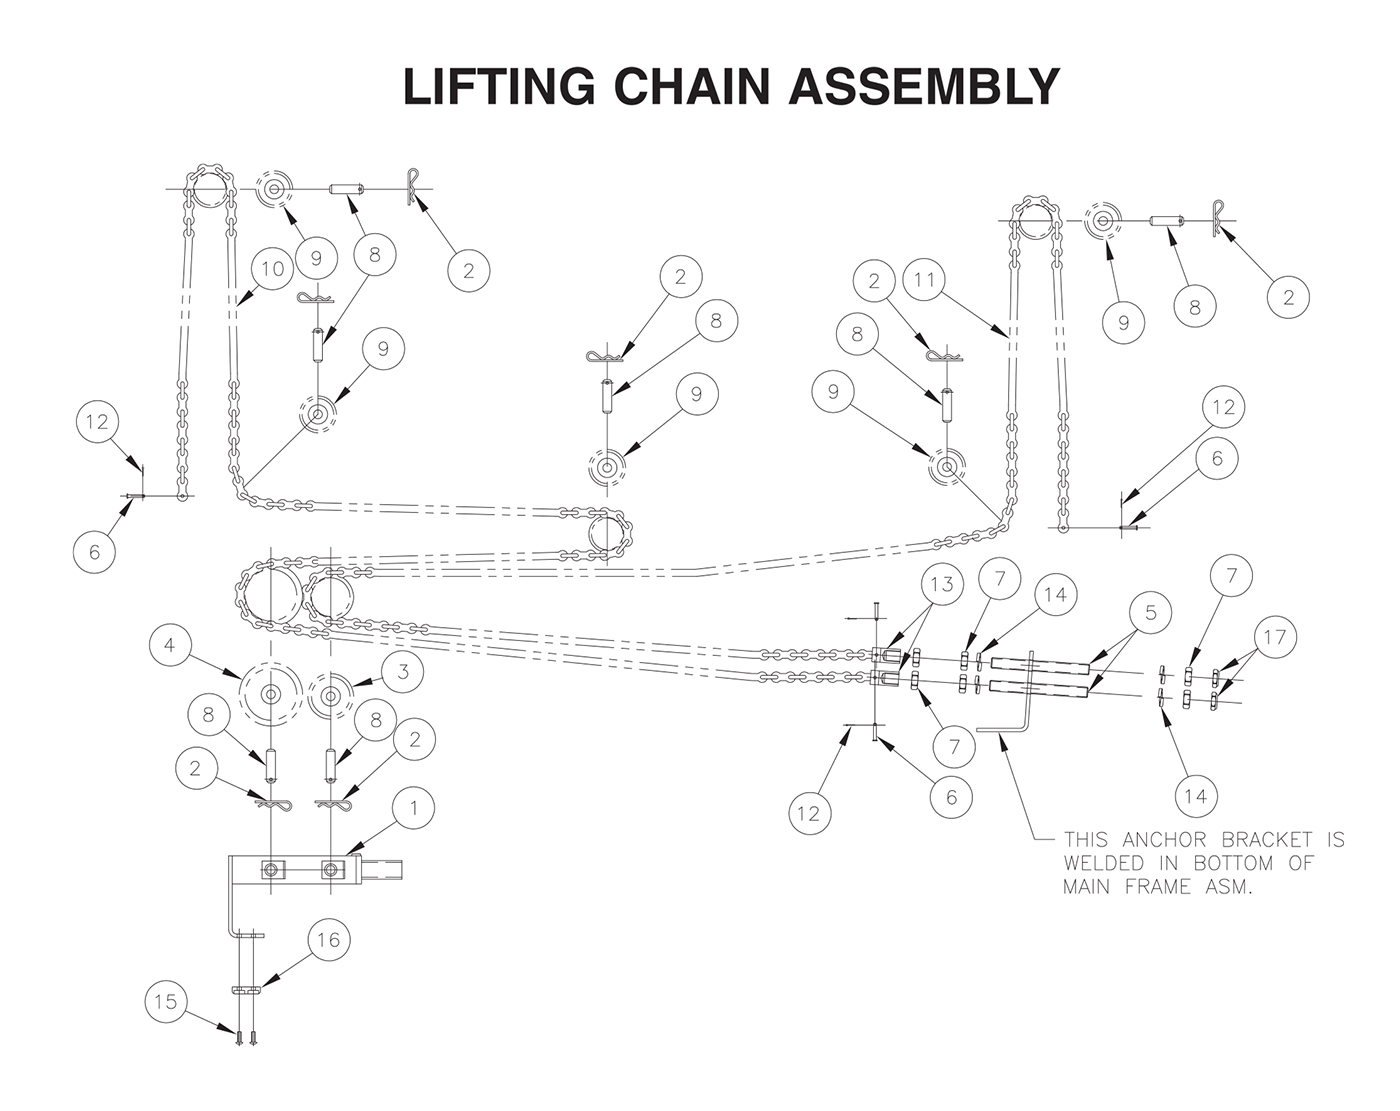 TVLR 20/20A Lifting Chain Assembly Diagram